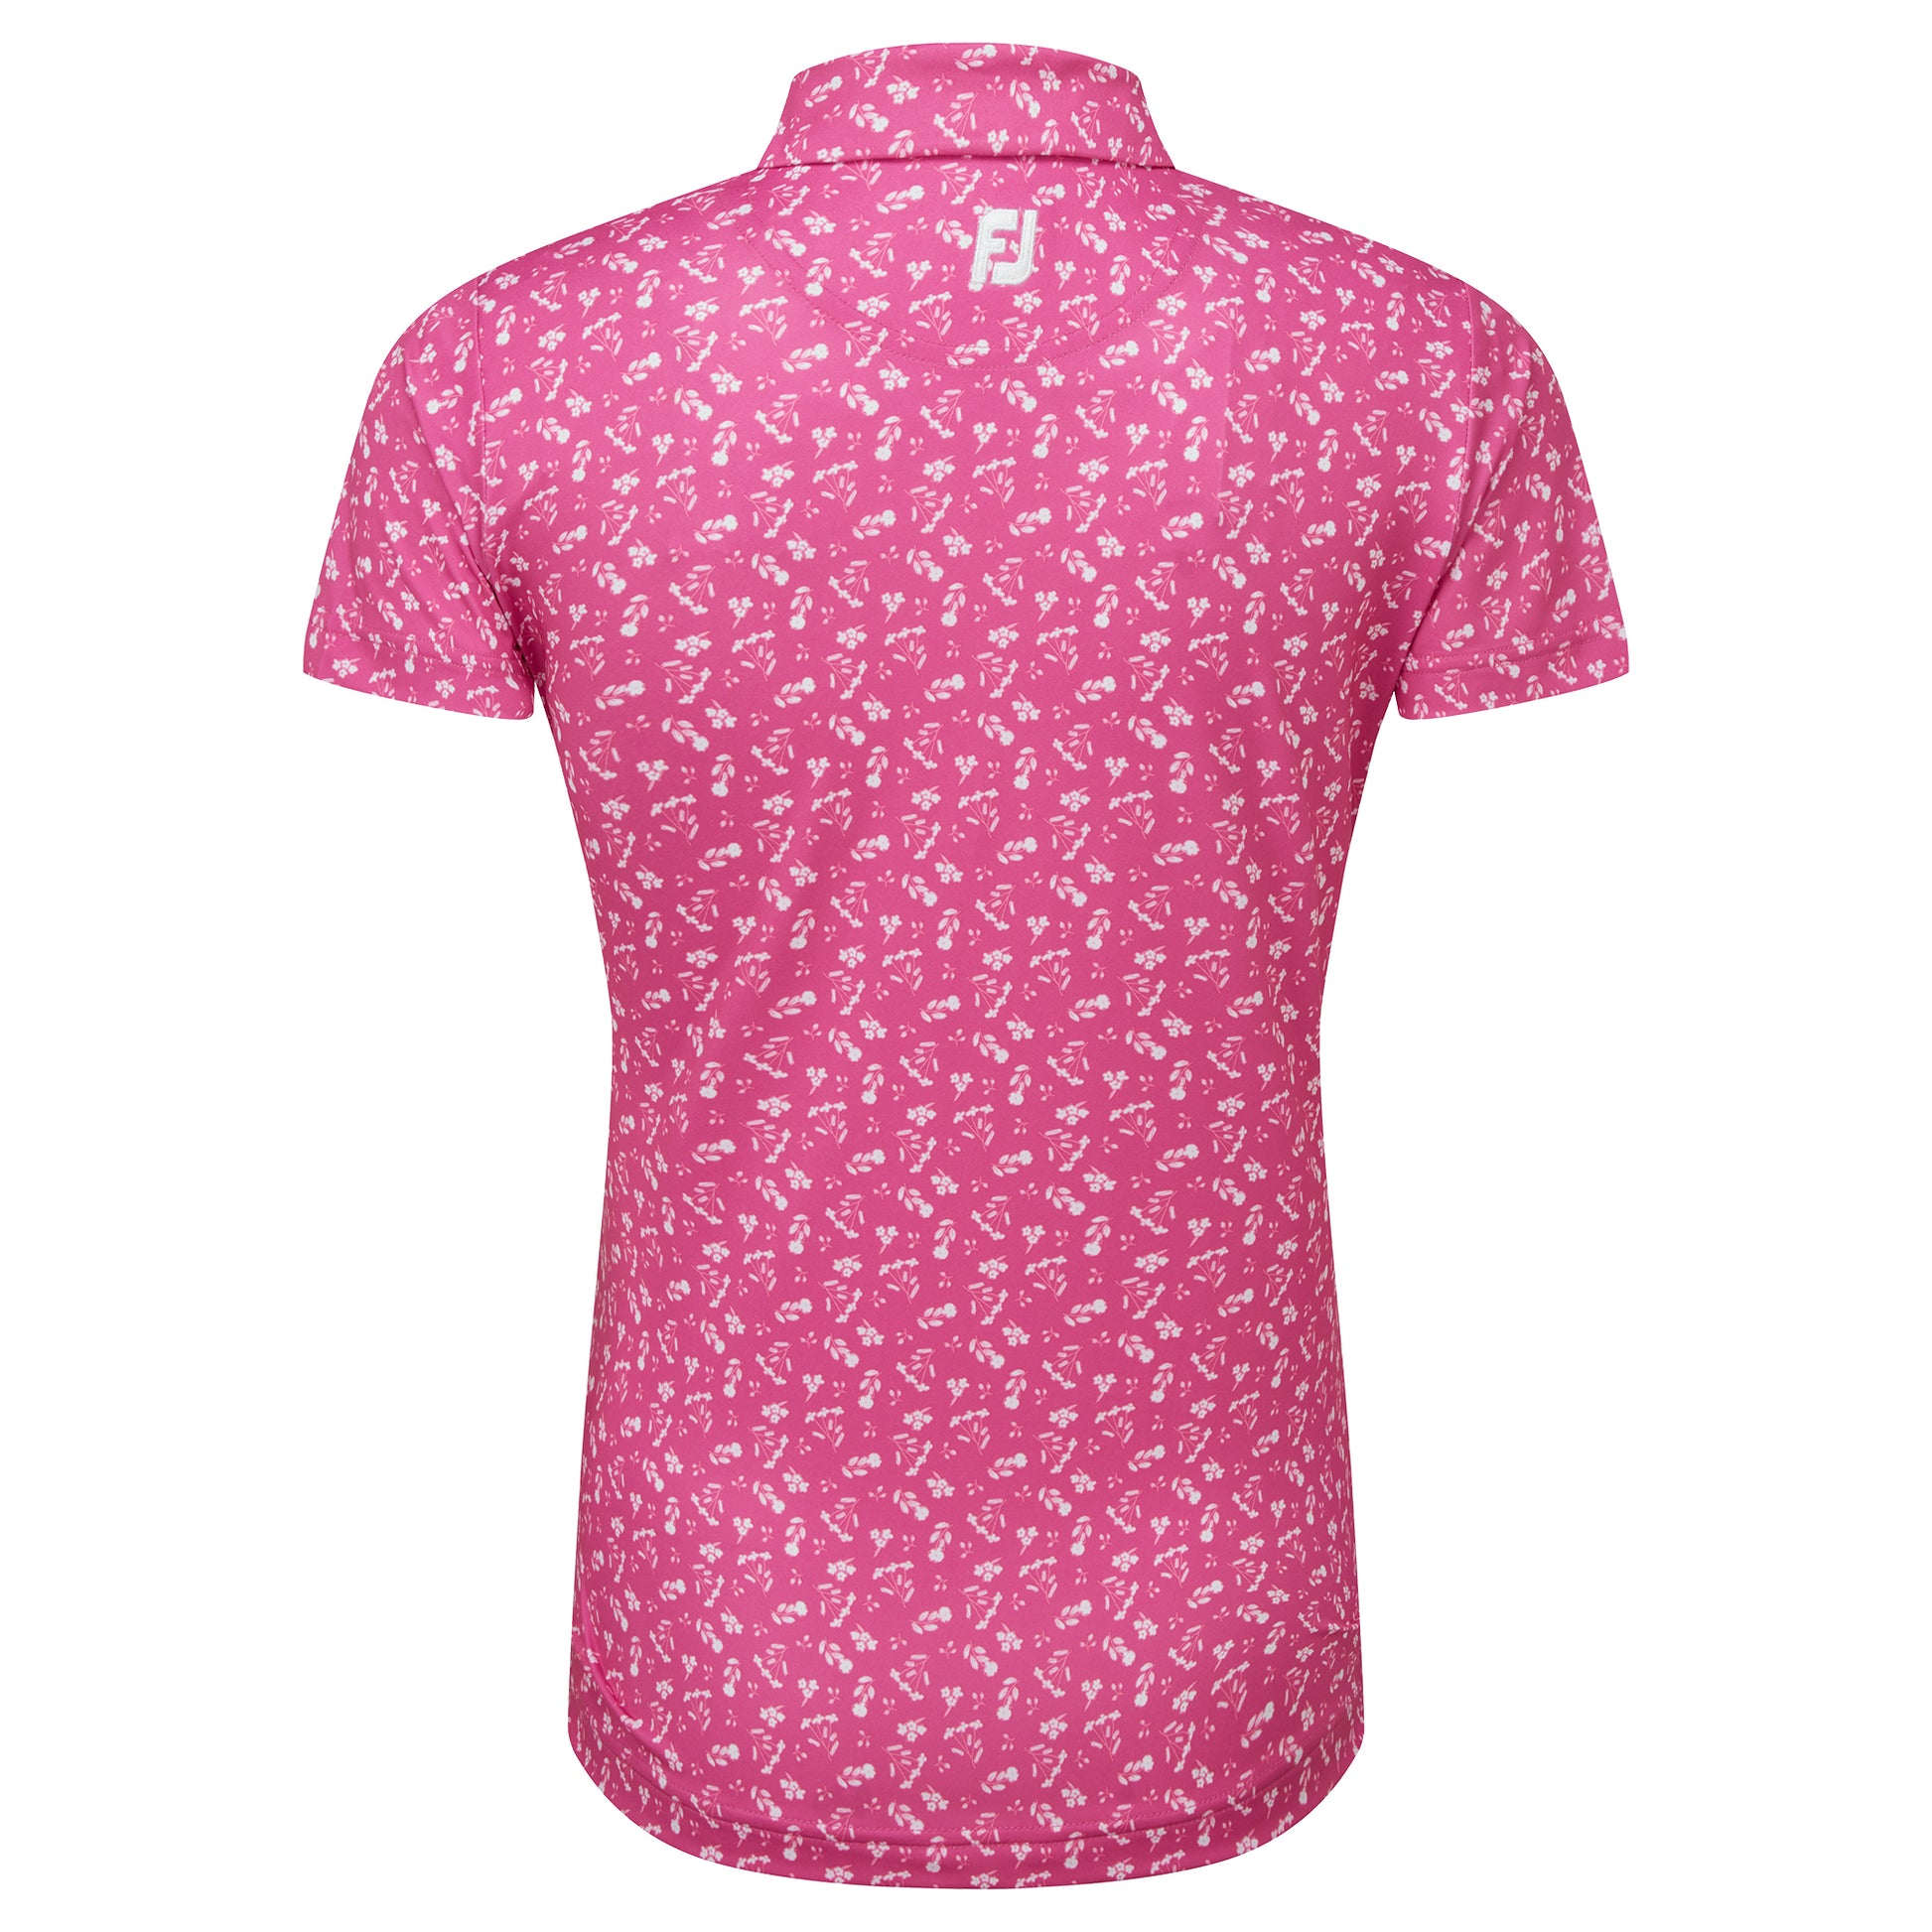 FootJoy Women's Floral Print Polo in Hot Pink & White